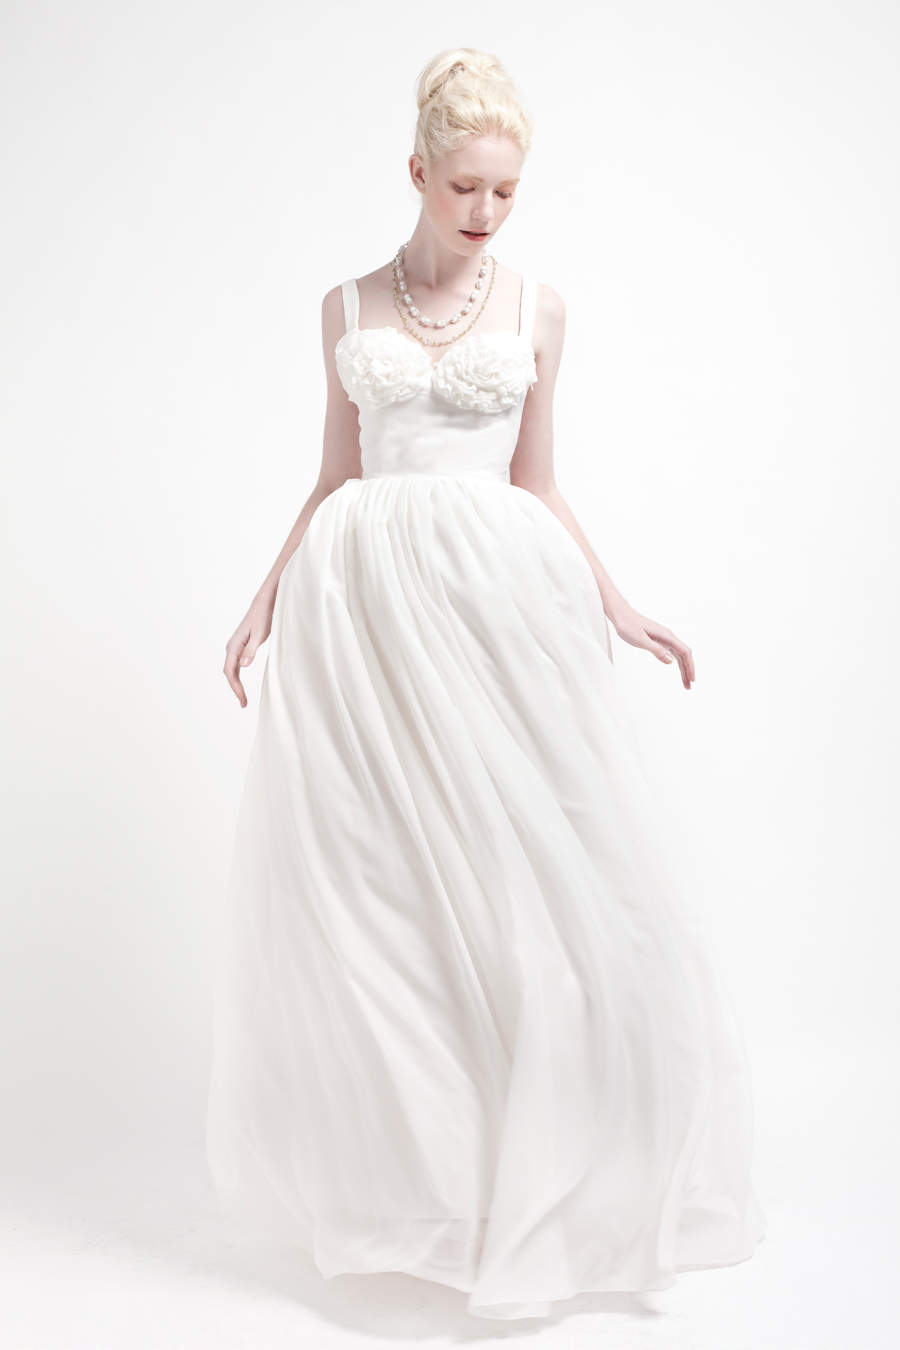 Flowercup - Kelsey Genna Debut Bridal Collection